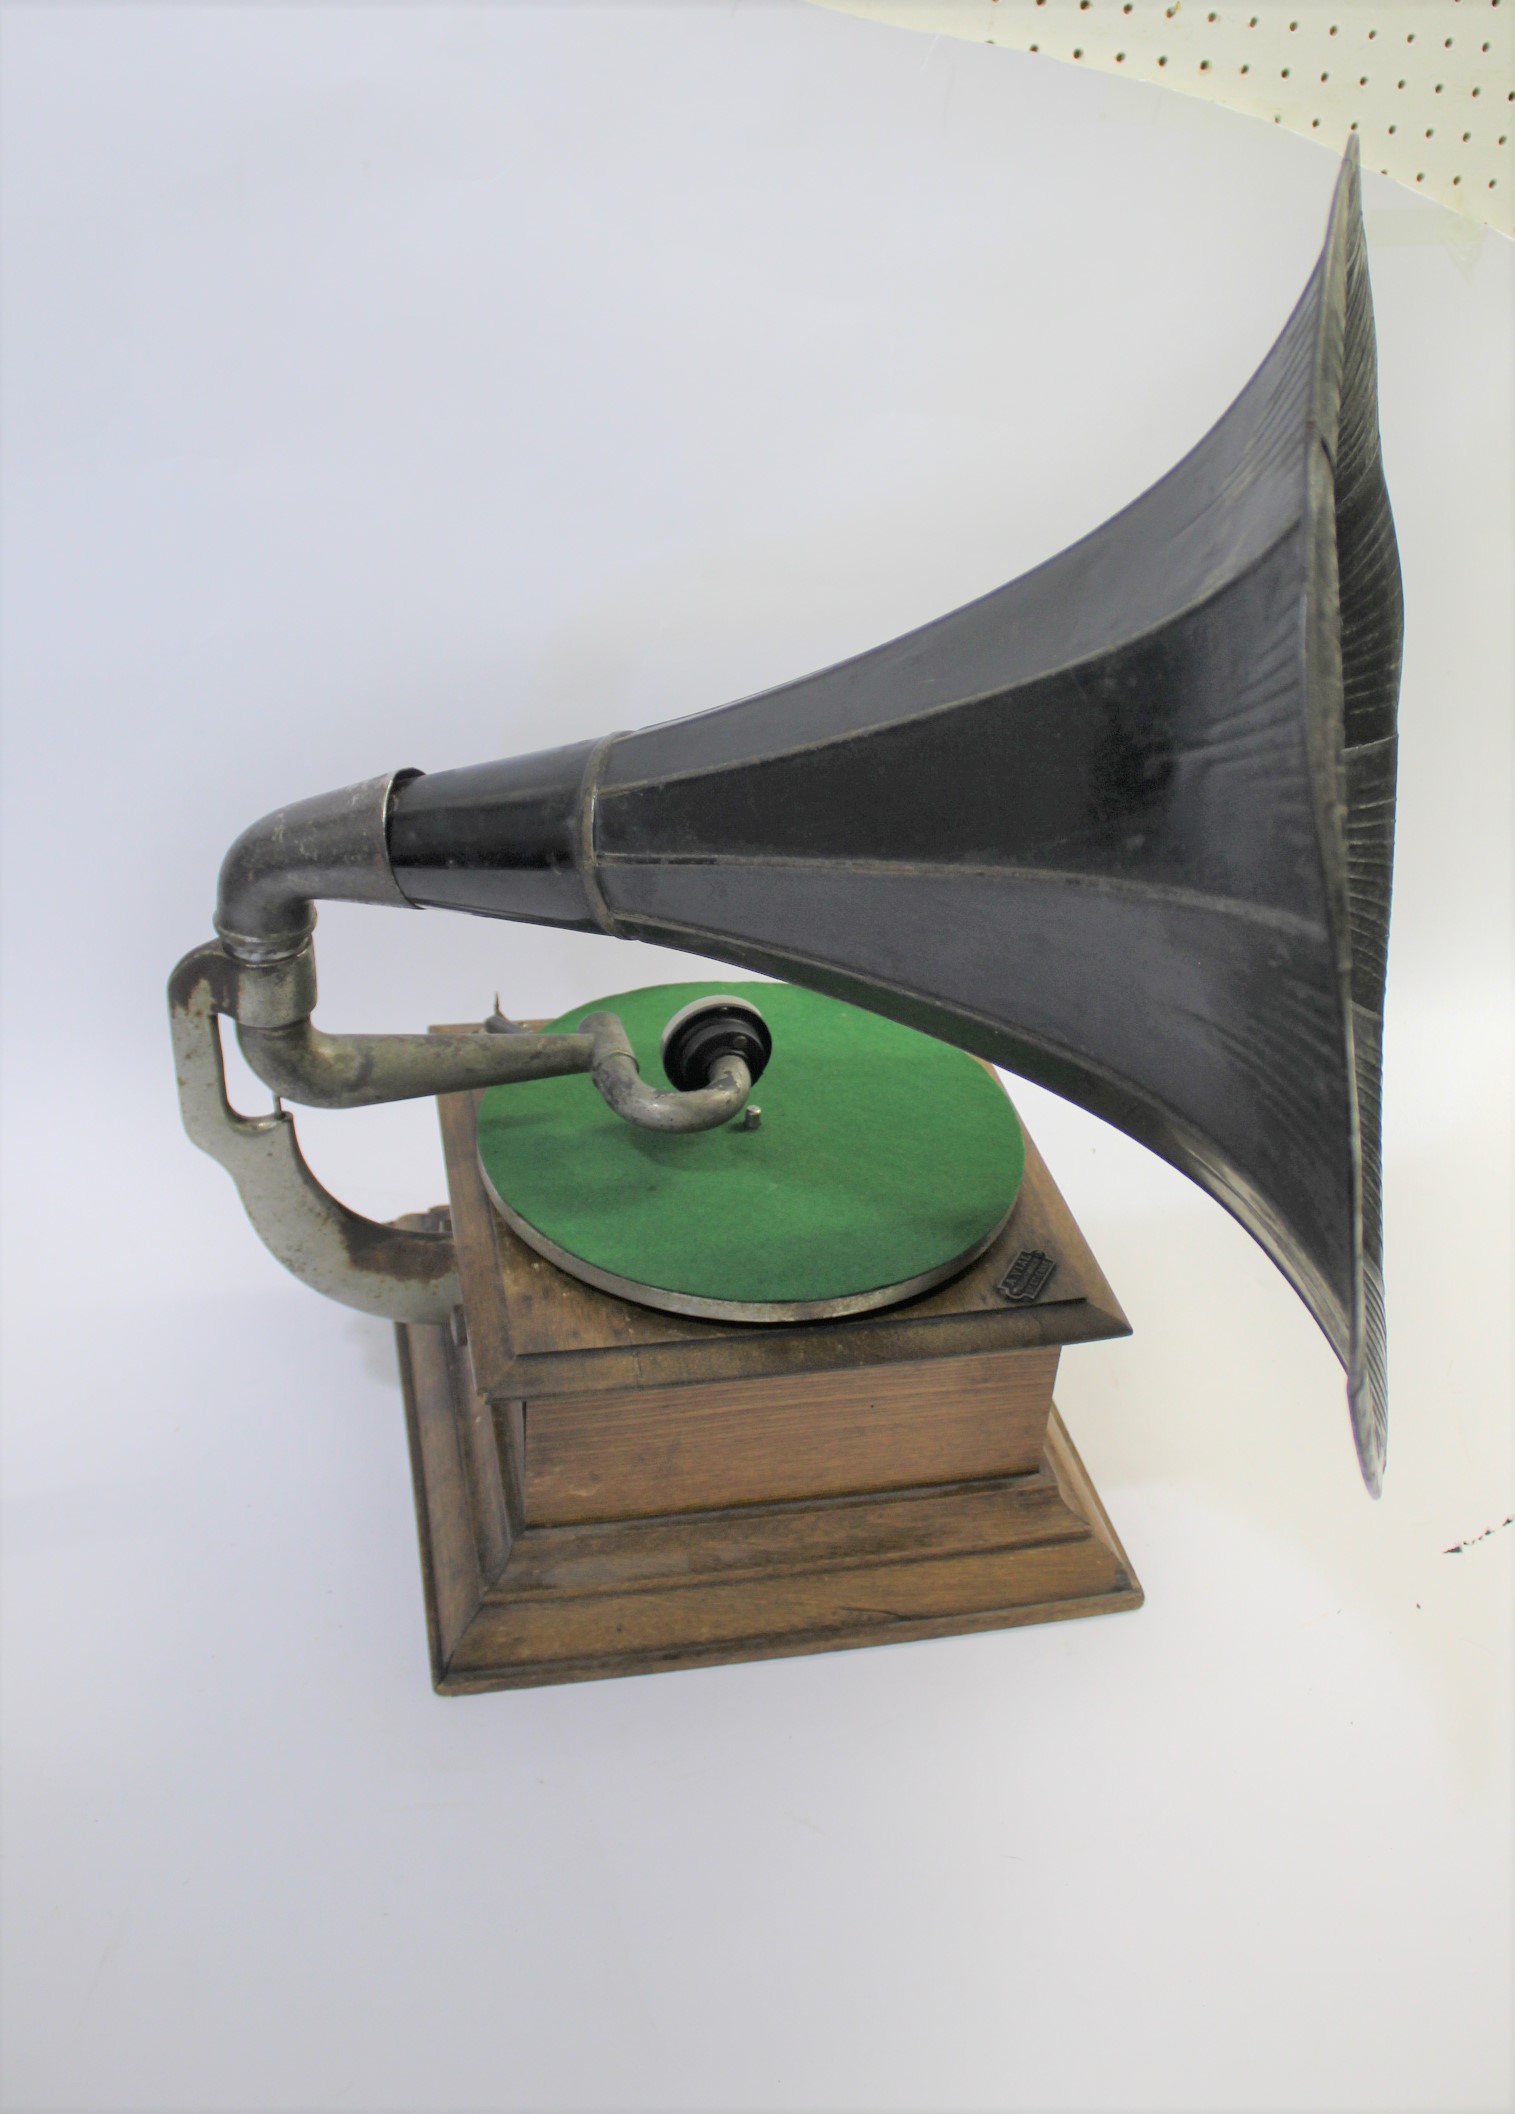 HMV HORN GRAMOPHONE & HORN the gramophone with an oak case and HMV Exhibition soundbox, with a label - Image 2 of 4